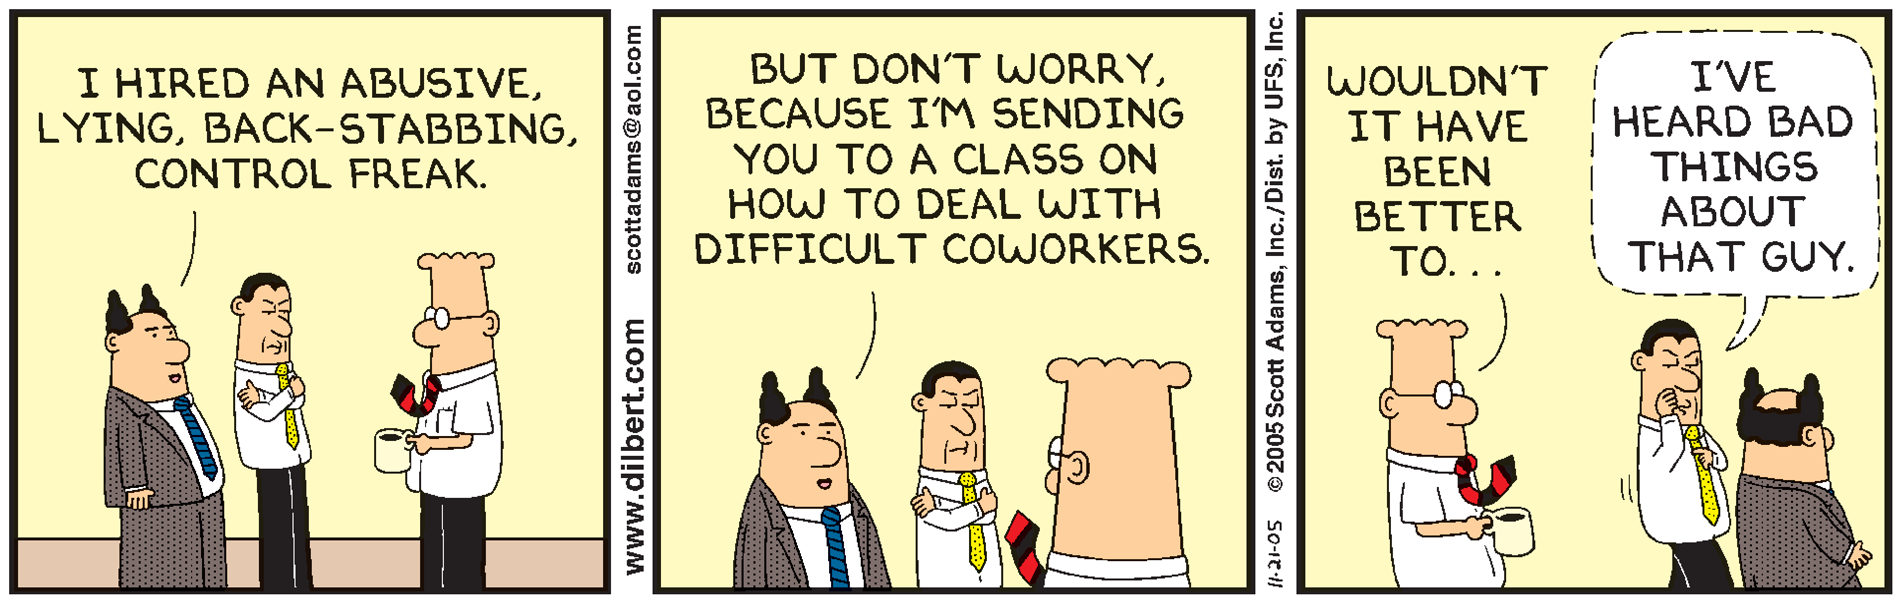 A Dilbert cartoon pokes fun at management for offering employees training on how to deal with toxic coworkers instead of not hiring toxic coworkers to begin with!